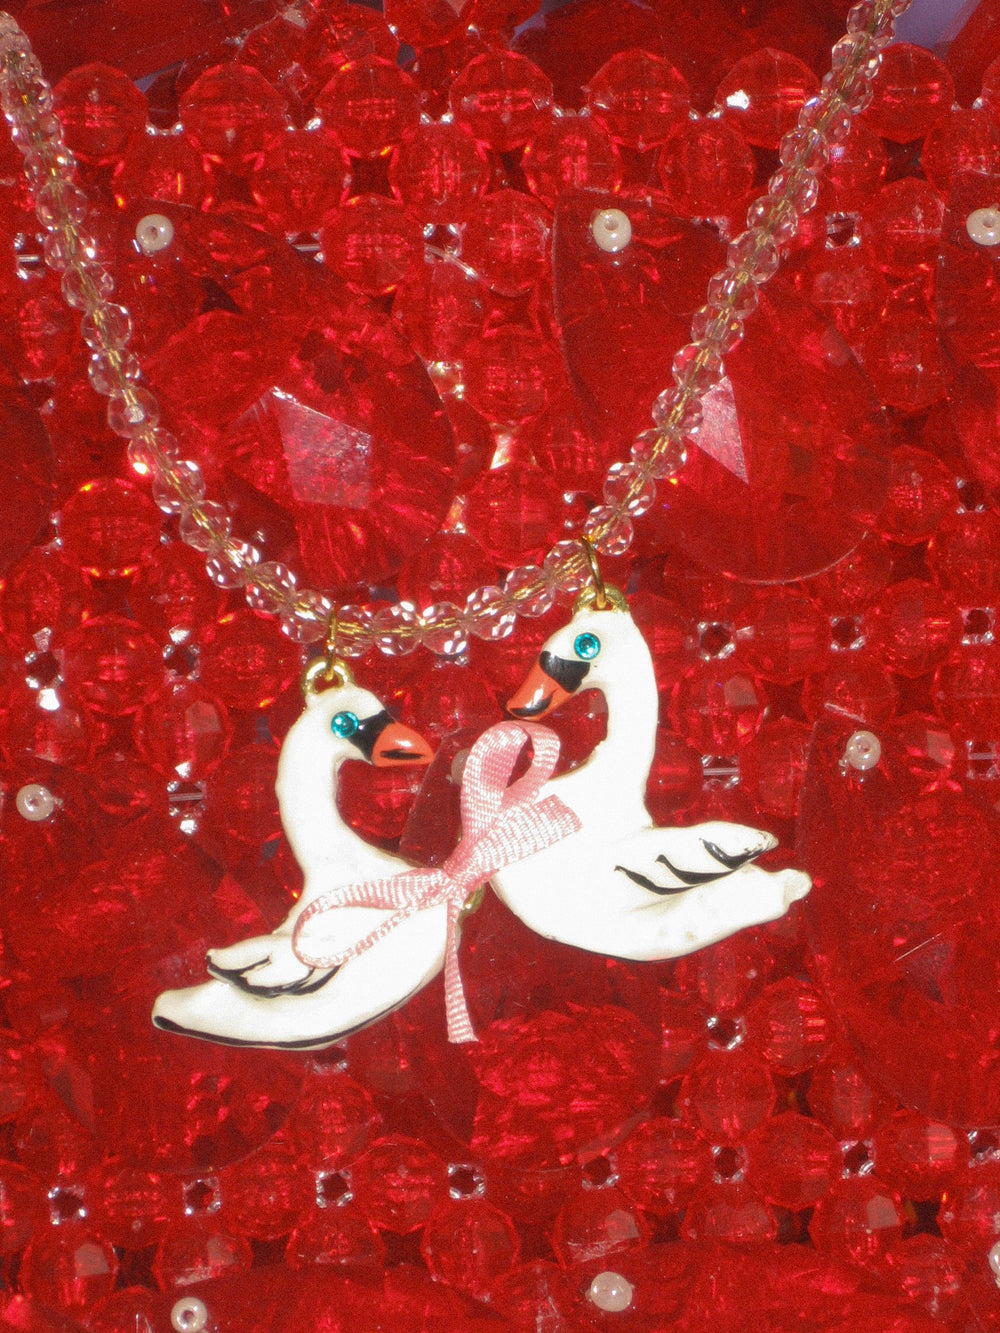 Kissing Swans Necklace